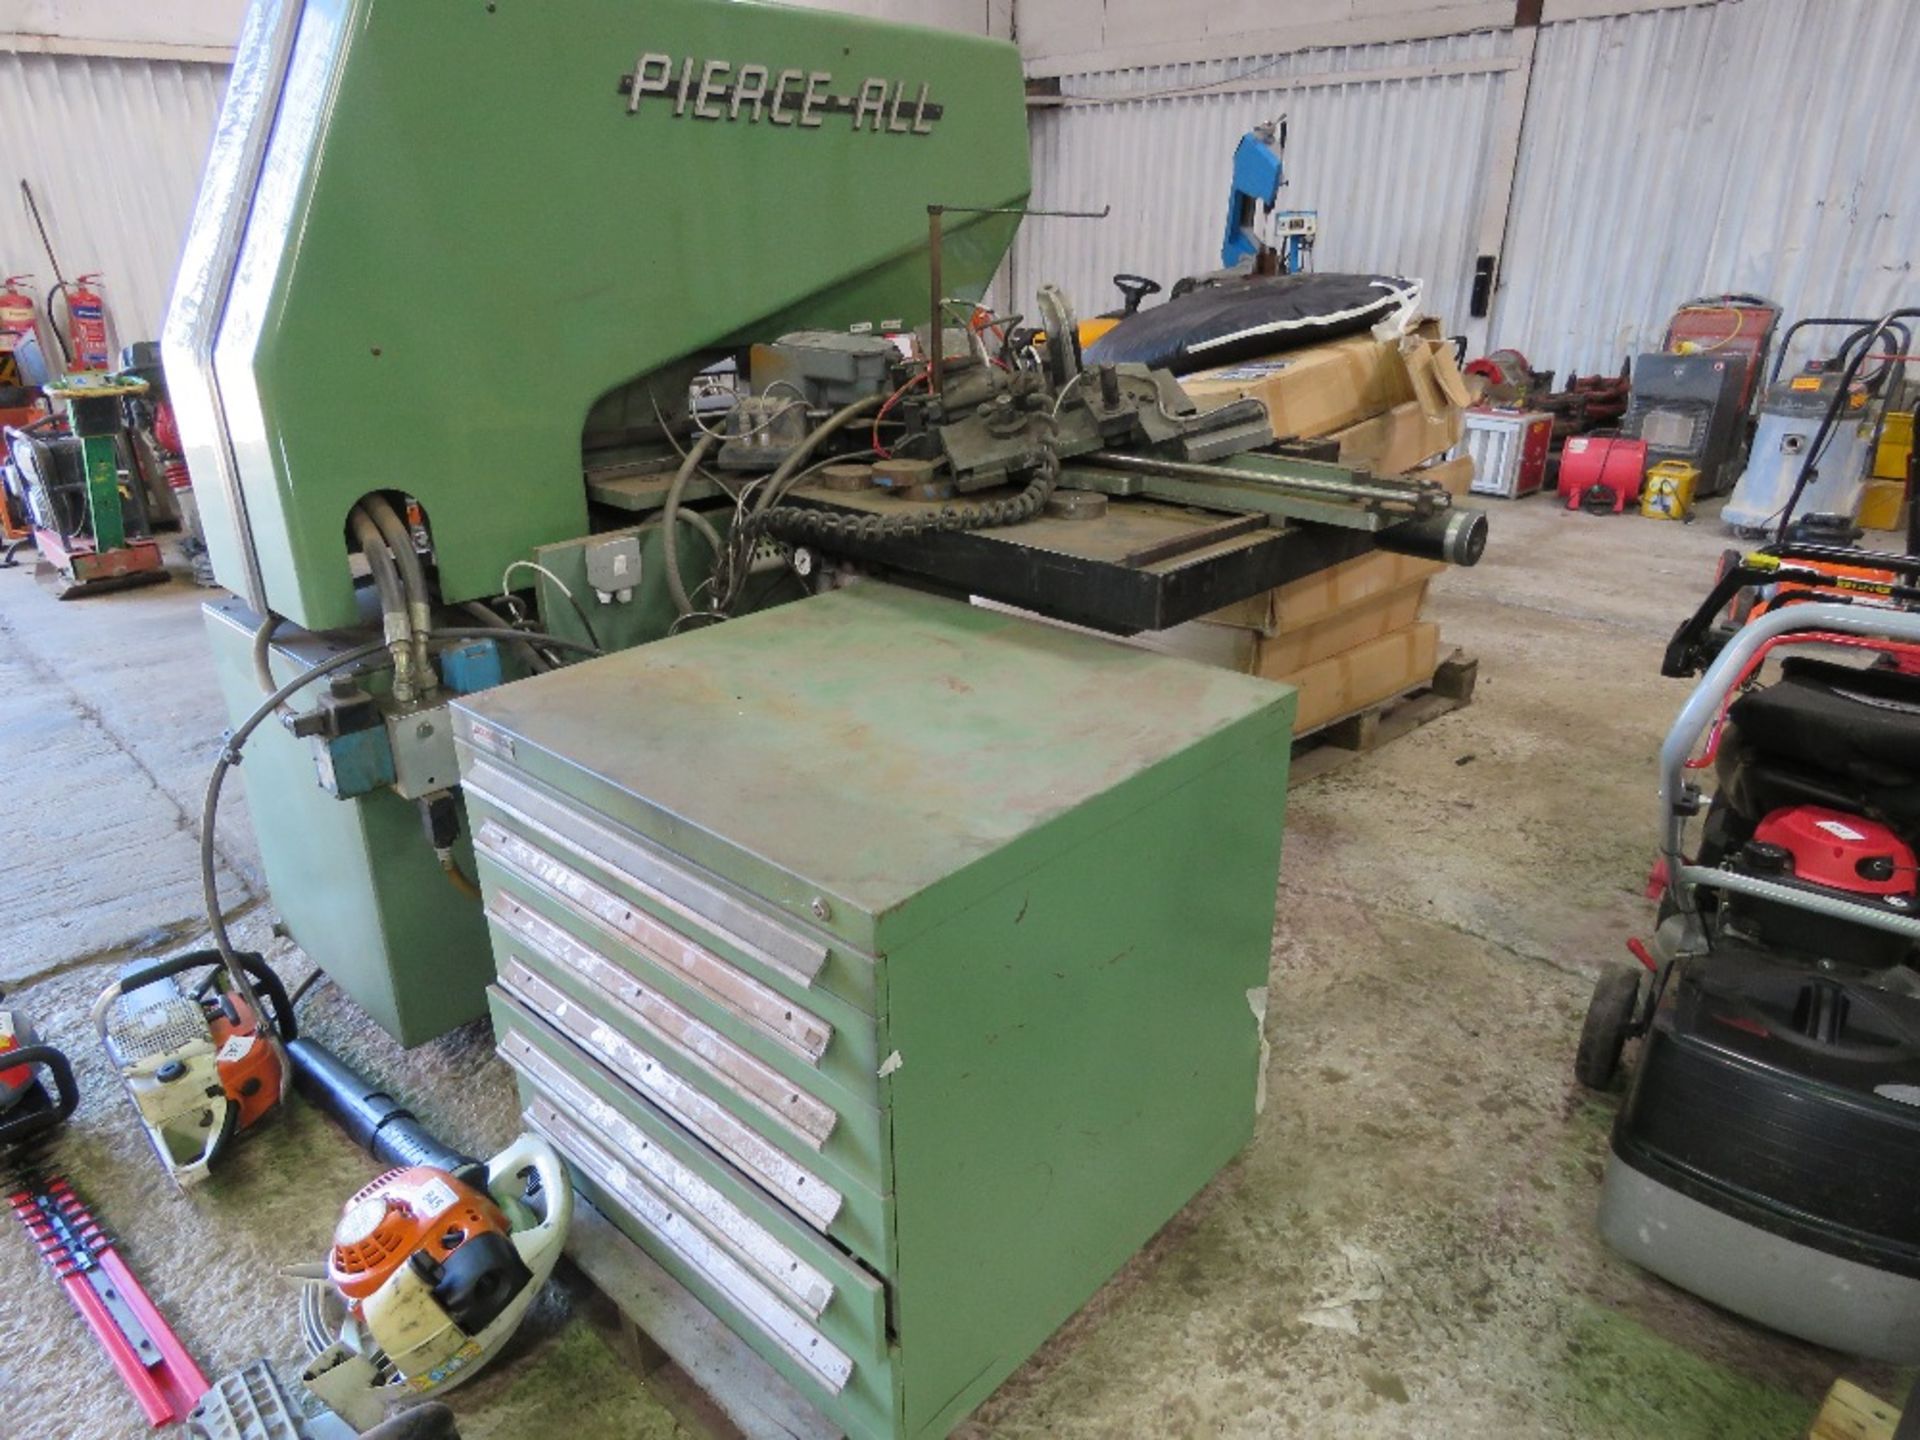 BMG PERCE ALL PUNCHING MACHINE WITH A CABINET FULL OF ASSOCIATED COLLETS AND TOOLING. SOURCED FROM S - Image 7 of 9